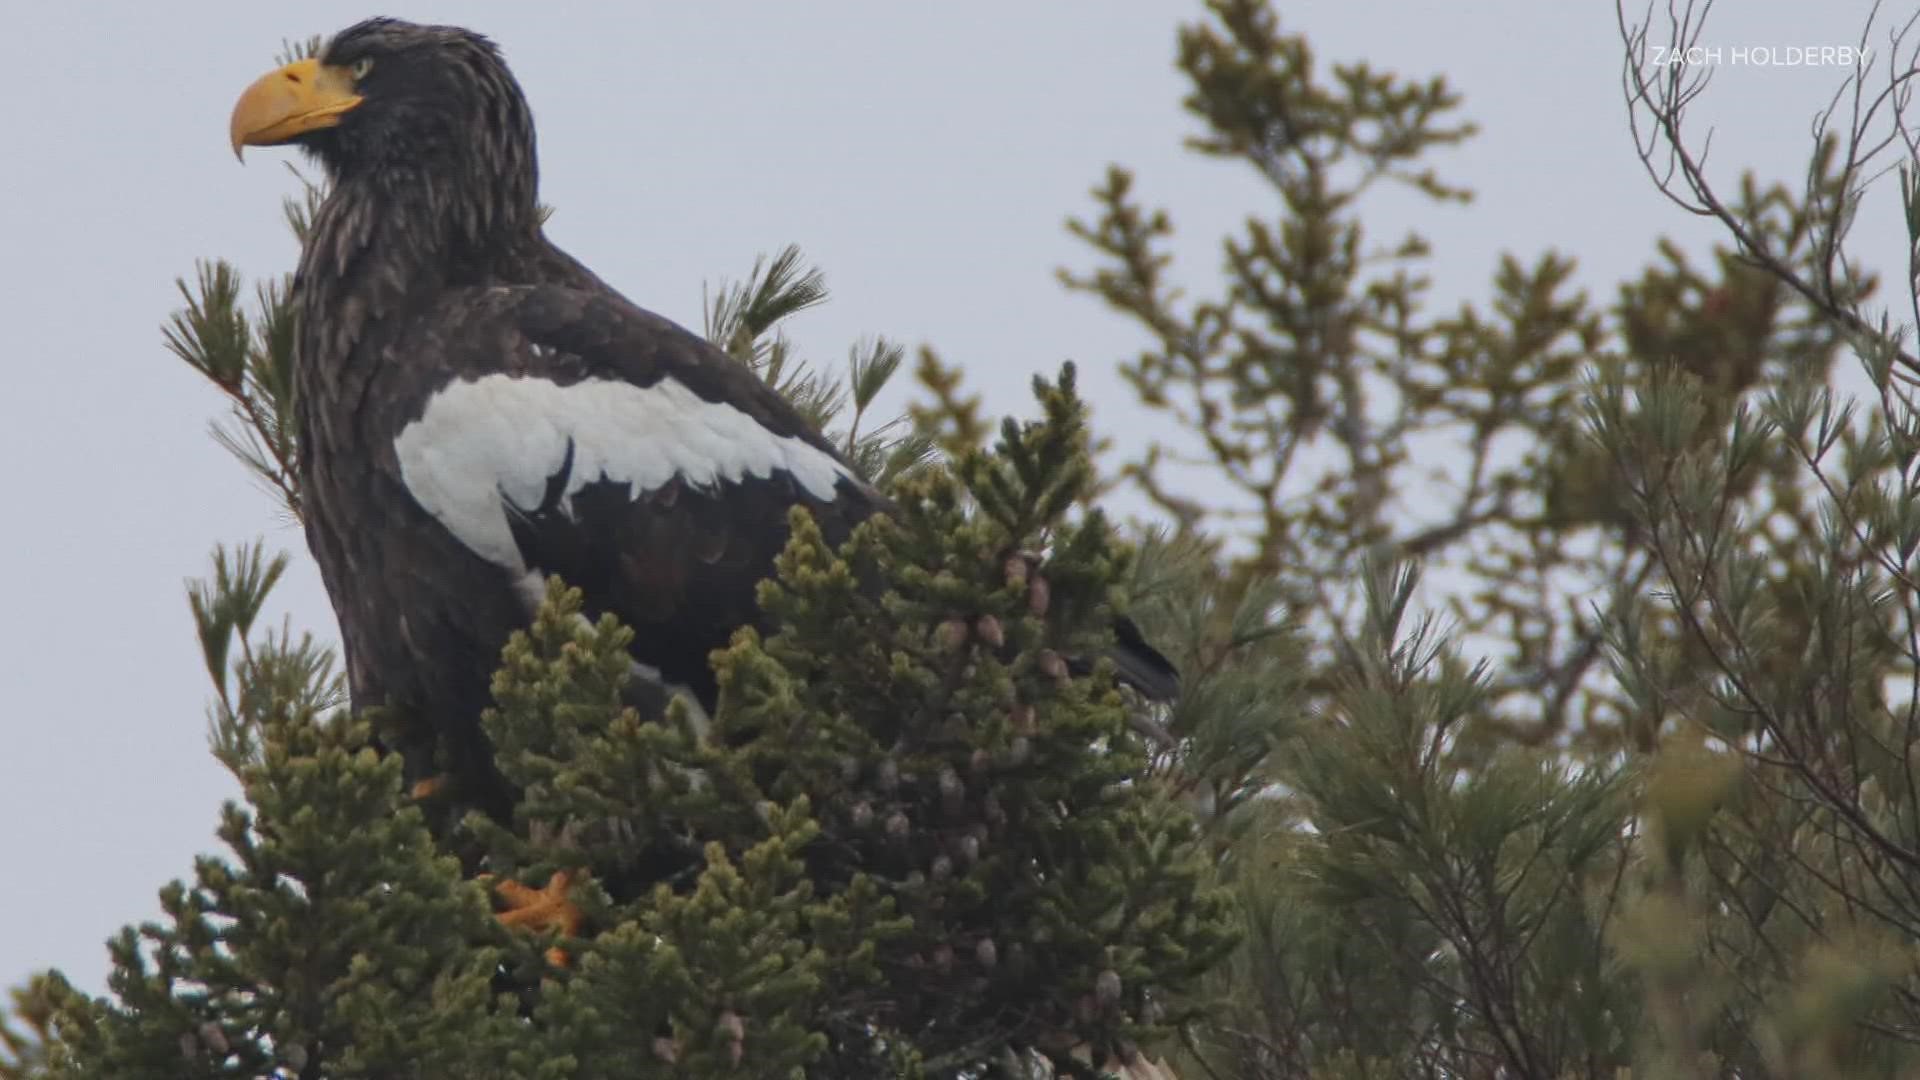 This Steller's Sea Eagle has been flying around North America since the summer of 2020 but has stayed in Maine for the longest amount of time.